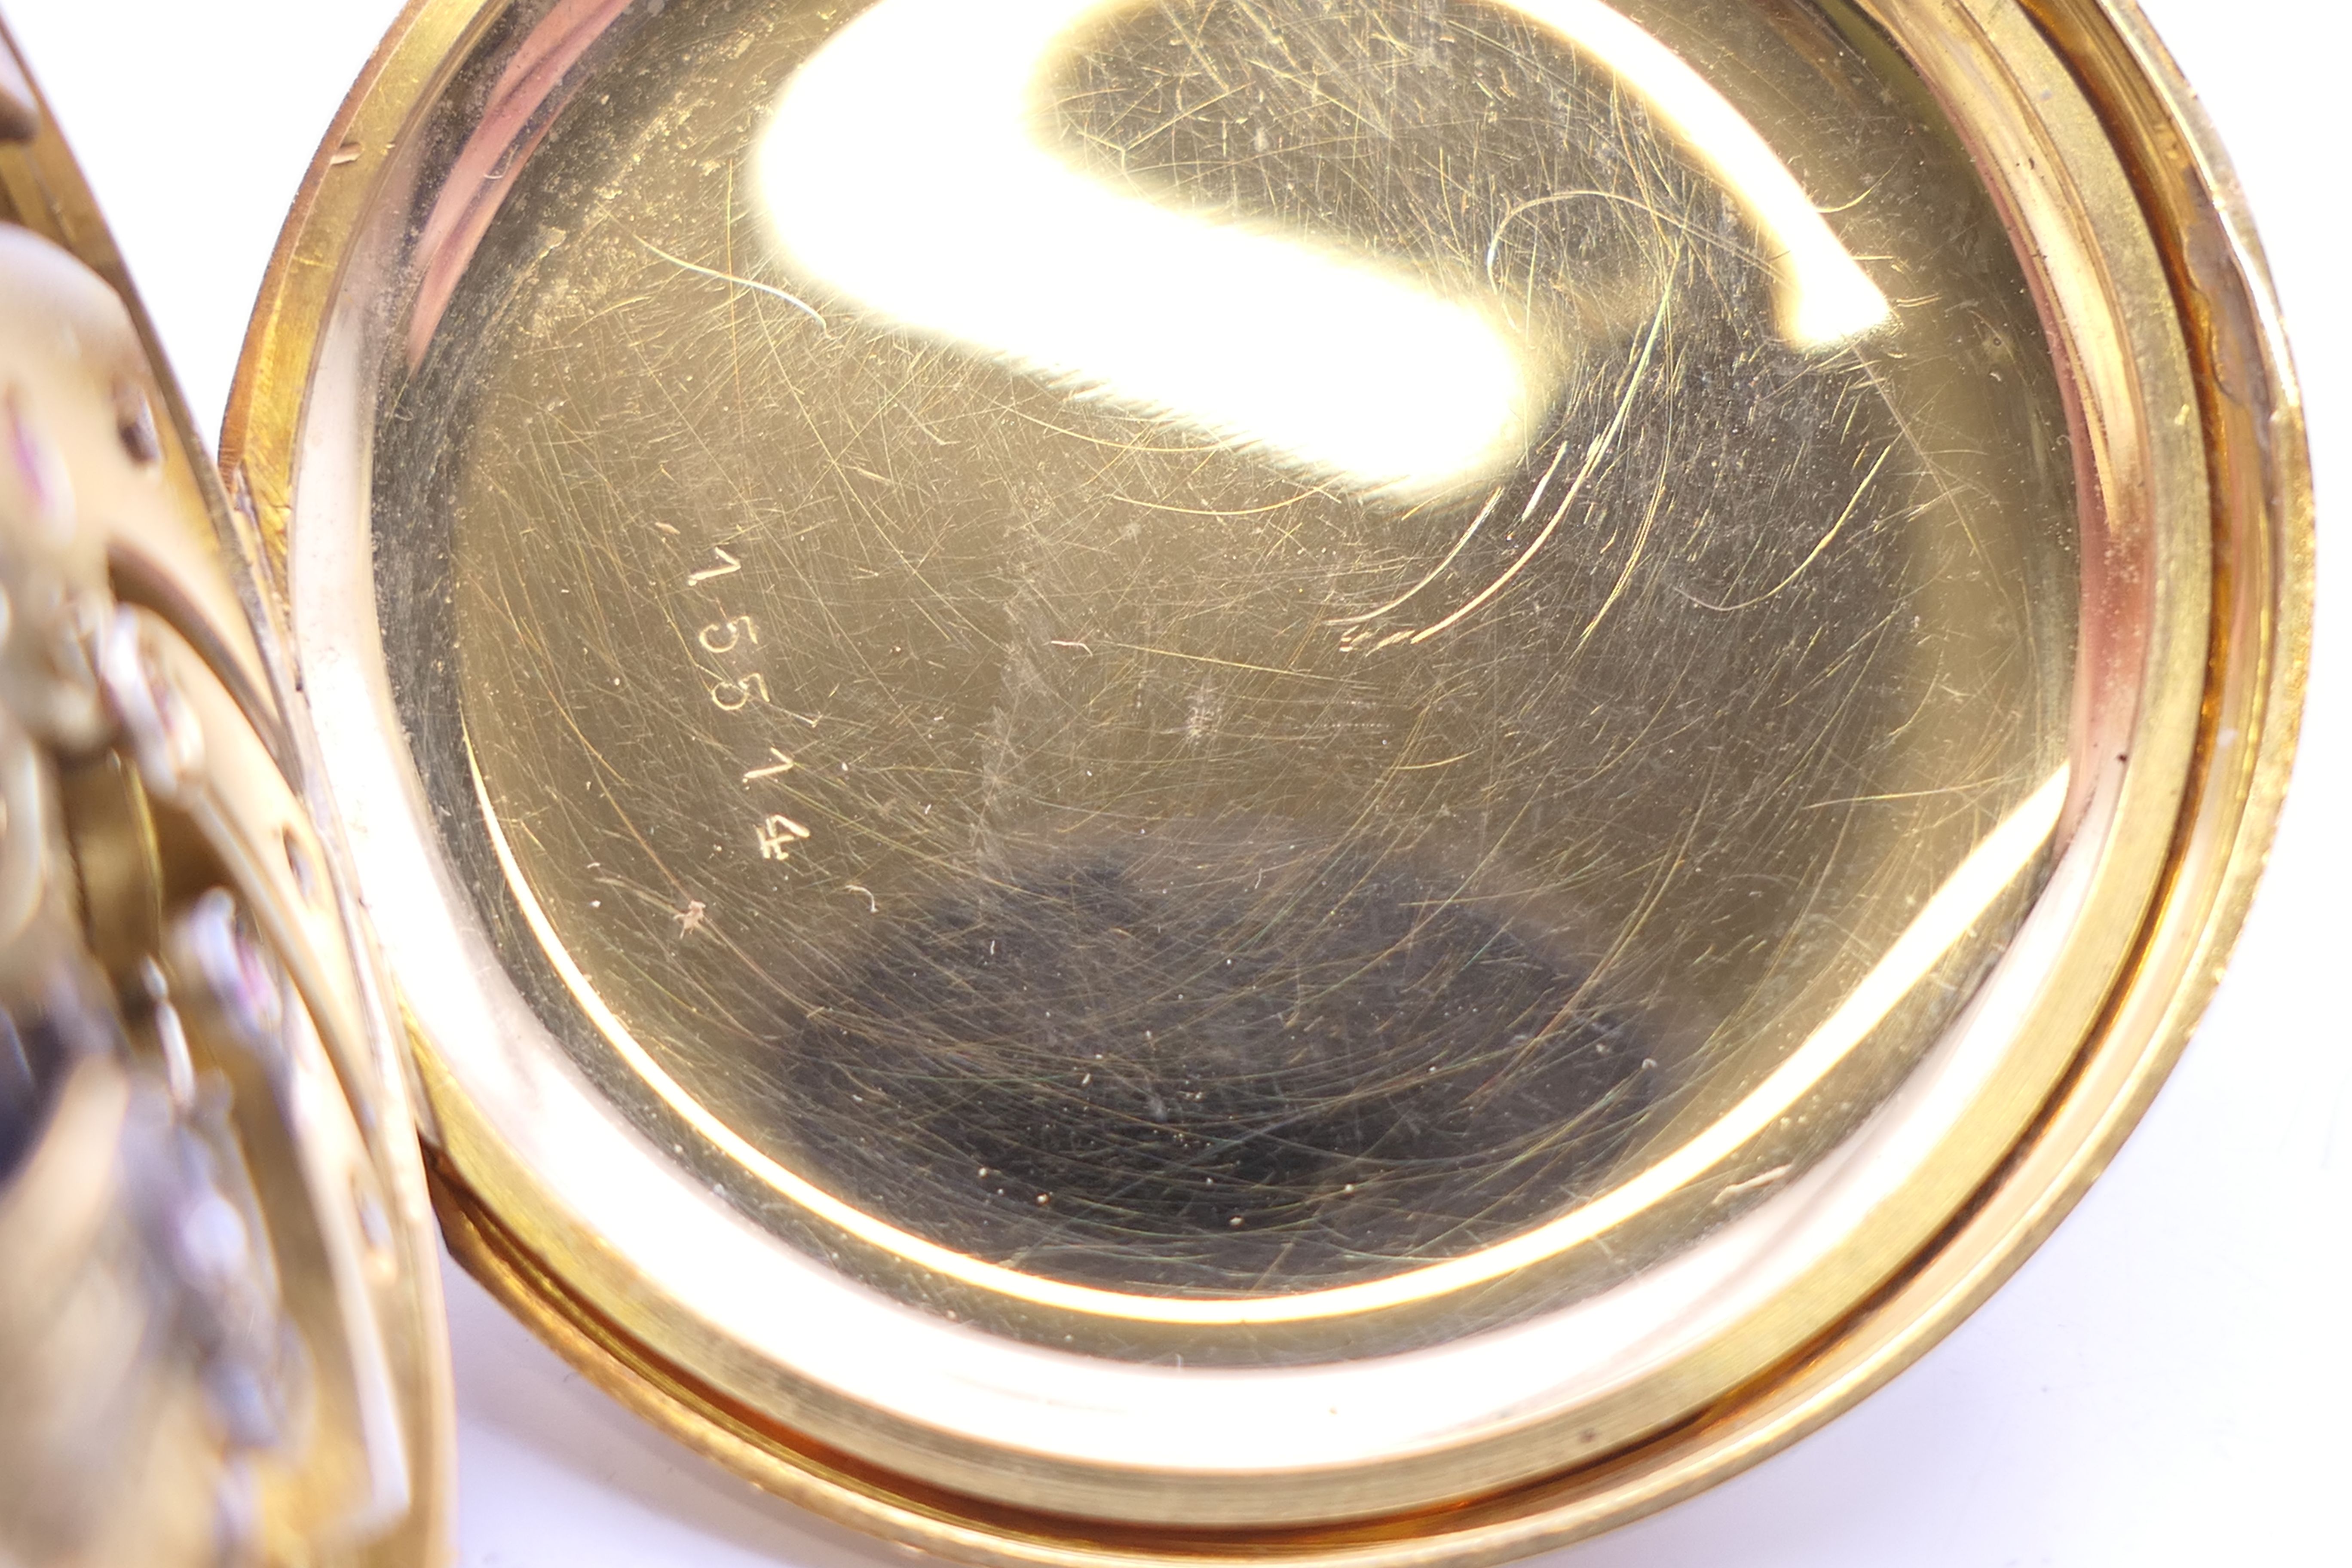 An 18 ct gold pocket watch with florally engraved dial, serial number 15514. 4.25 diameter. - Image 7 of 8